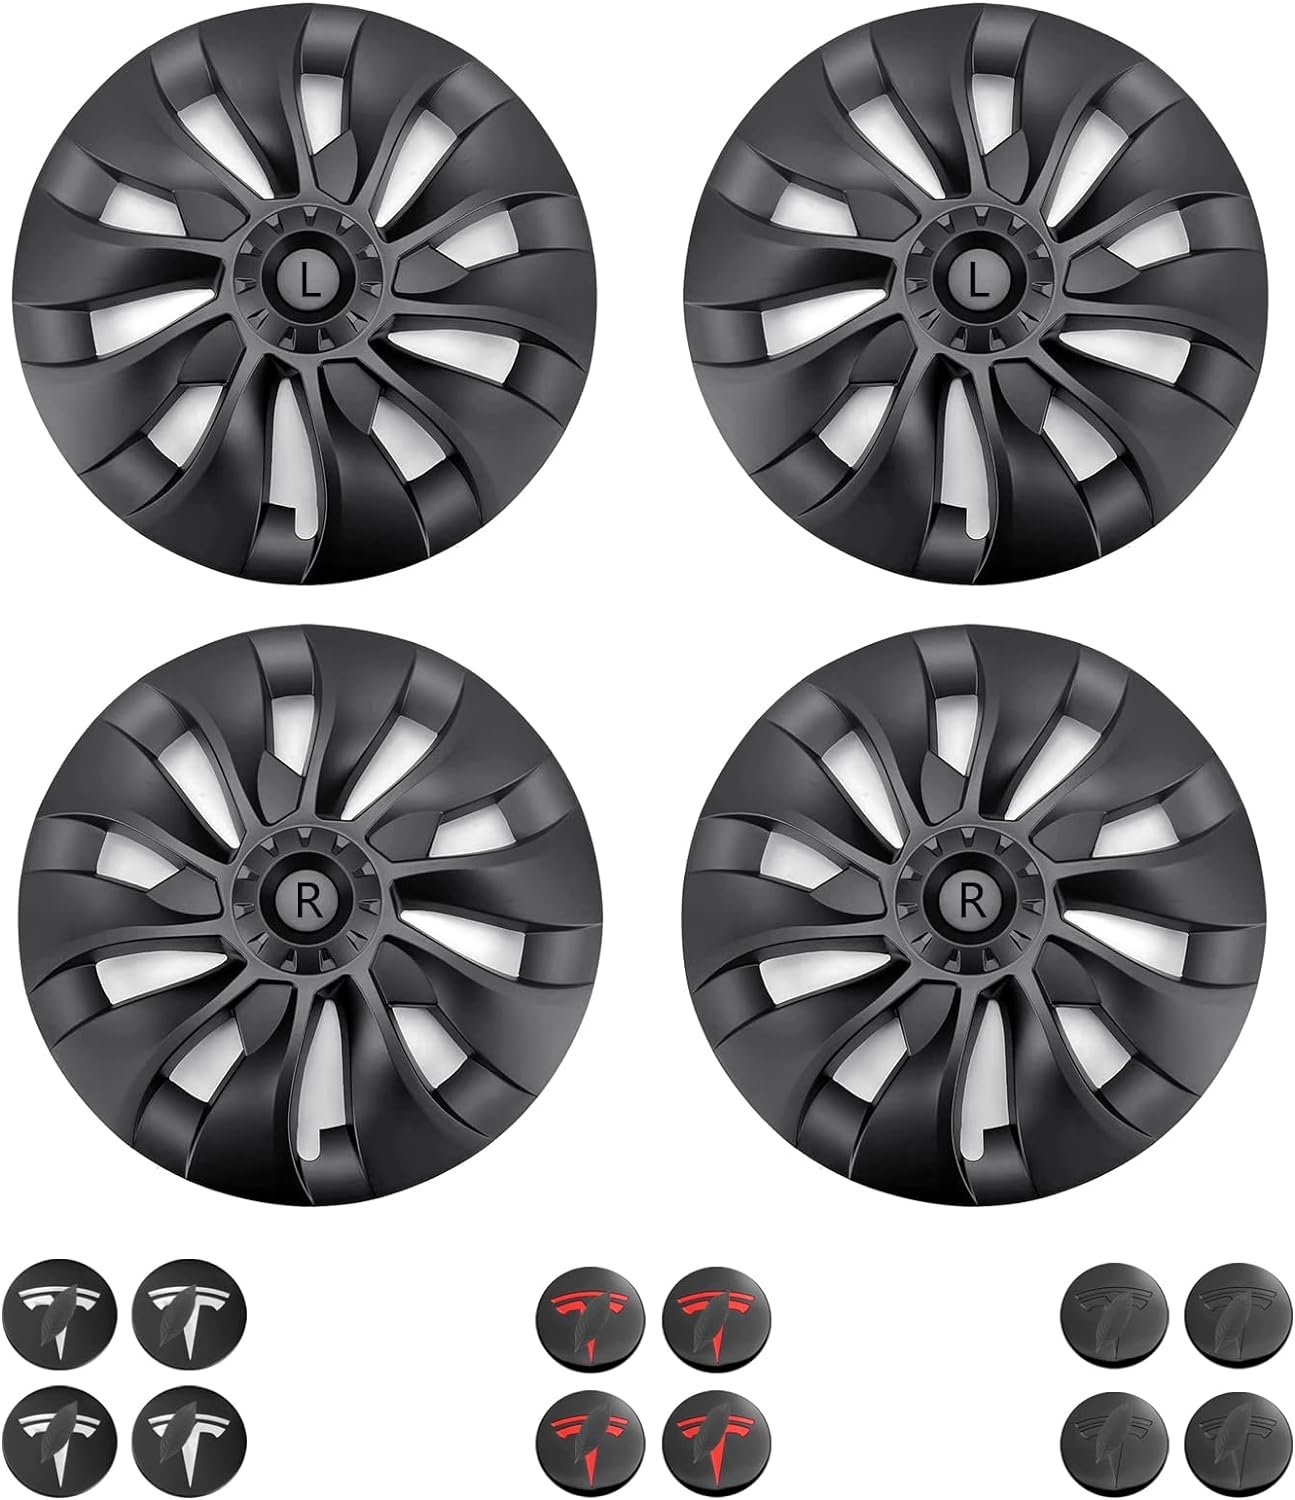 Blade Style Black Wheel Cover Hubcap Review